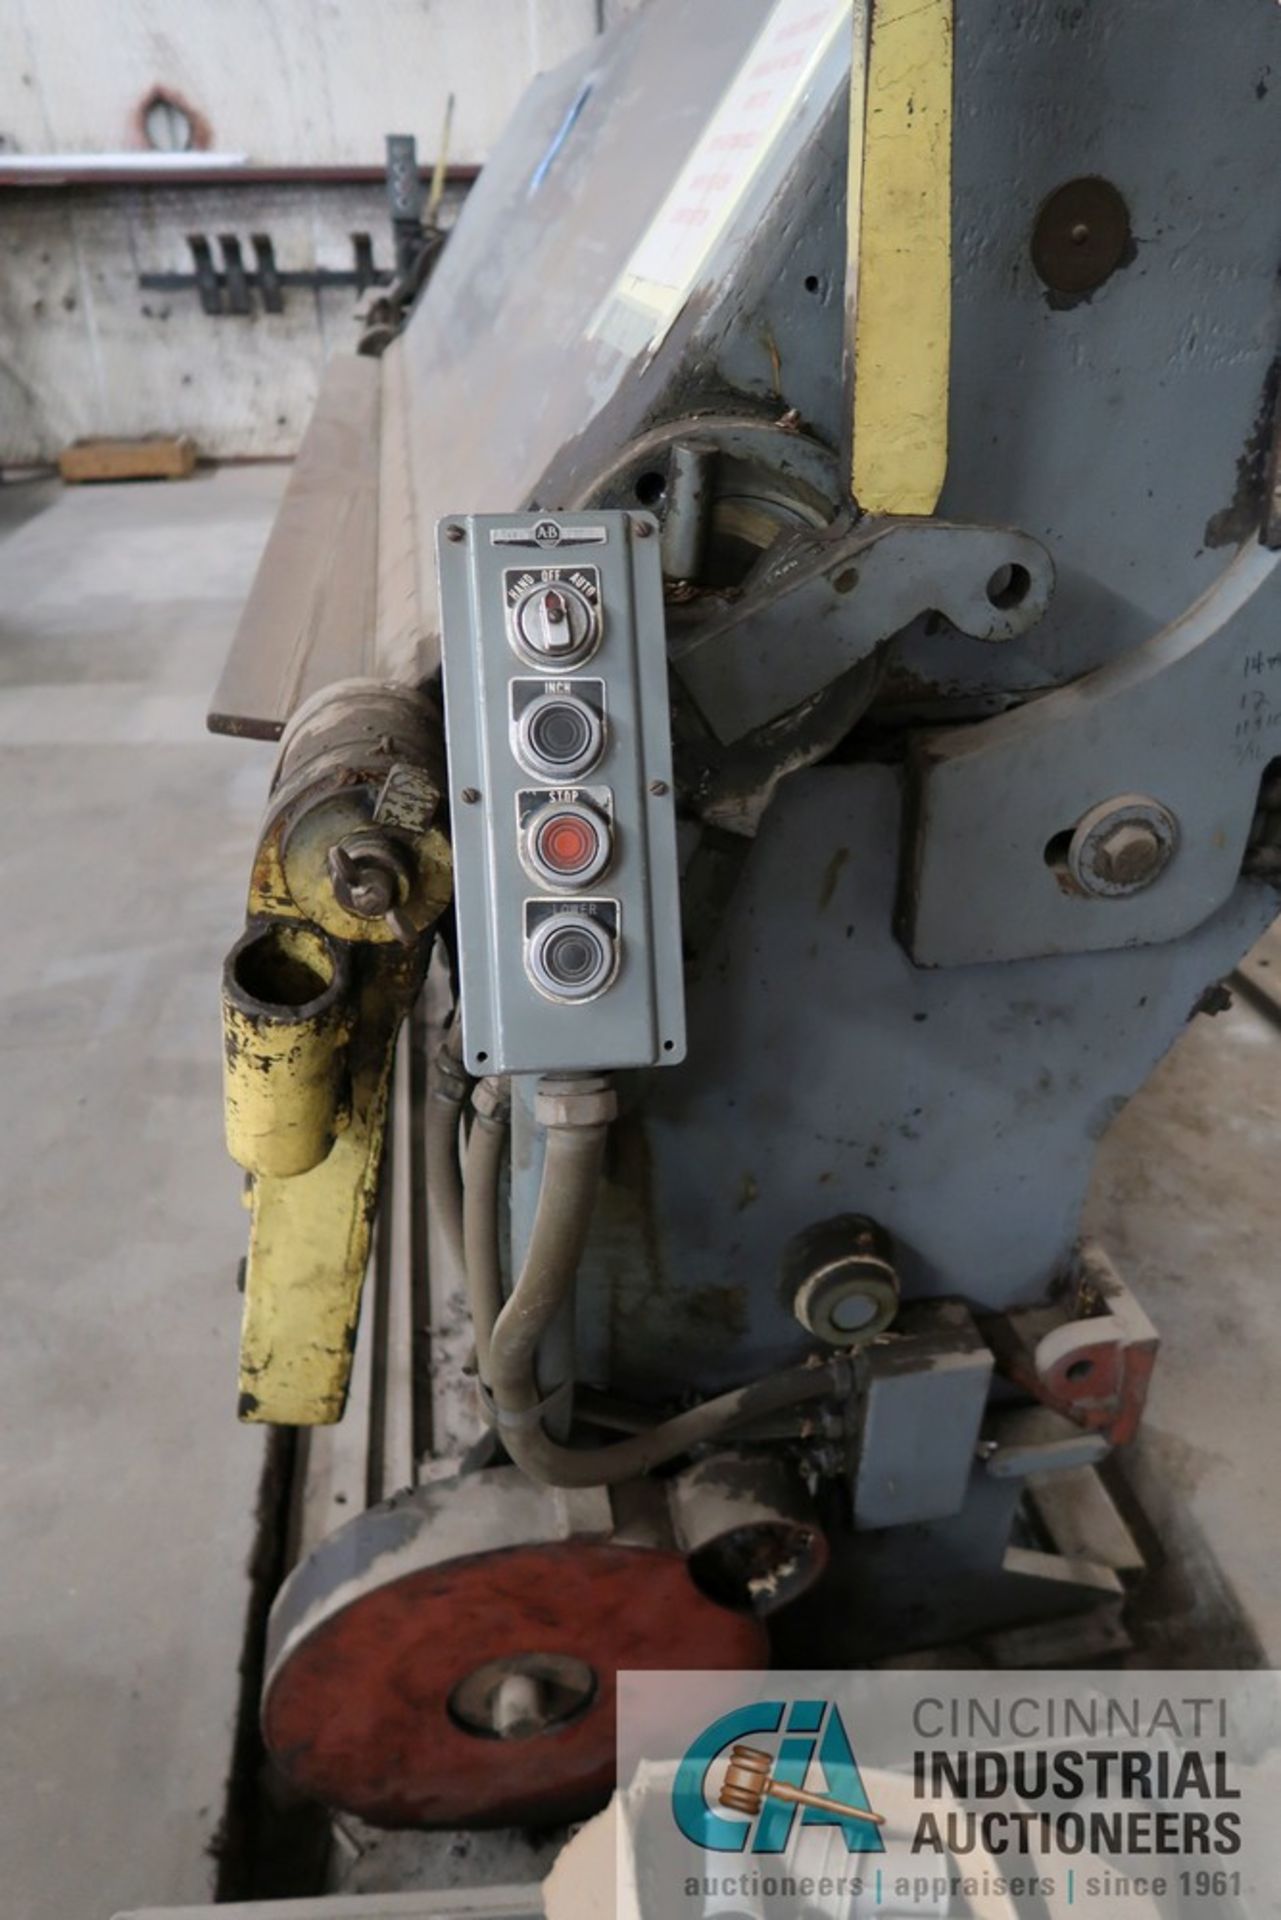 3/16" X 8' MFG UNKNOWN POWER APRON BRAKE; S/N N/A, 7.5 HP MOTOR, 3-PHASE, 208-222 / 440 VOLTS, - Image 5 of 6